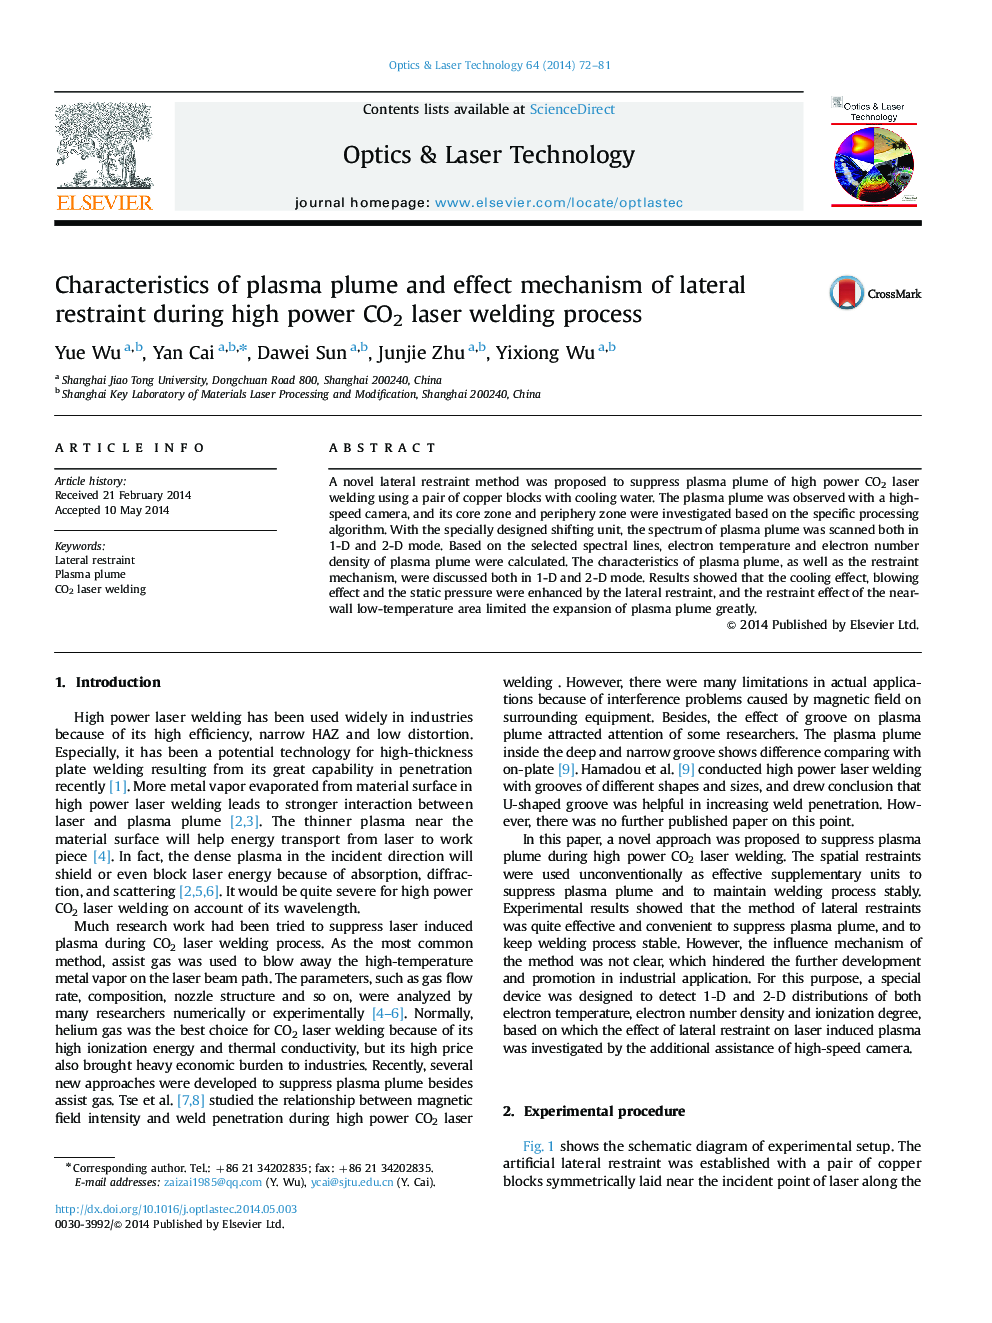 Characteristics of plasma plume and effect mechanism of lateral restraint during high power CO2 laser welding process